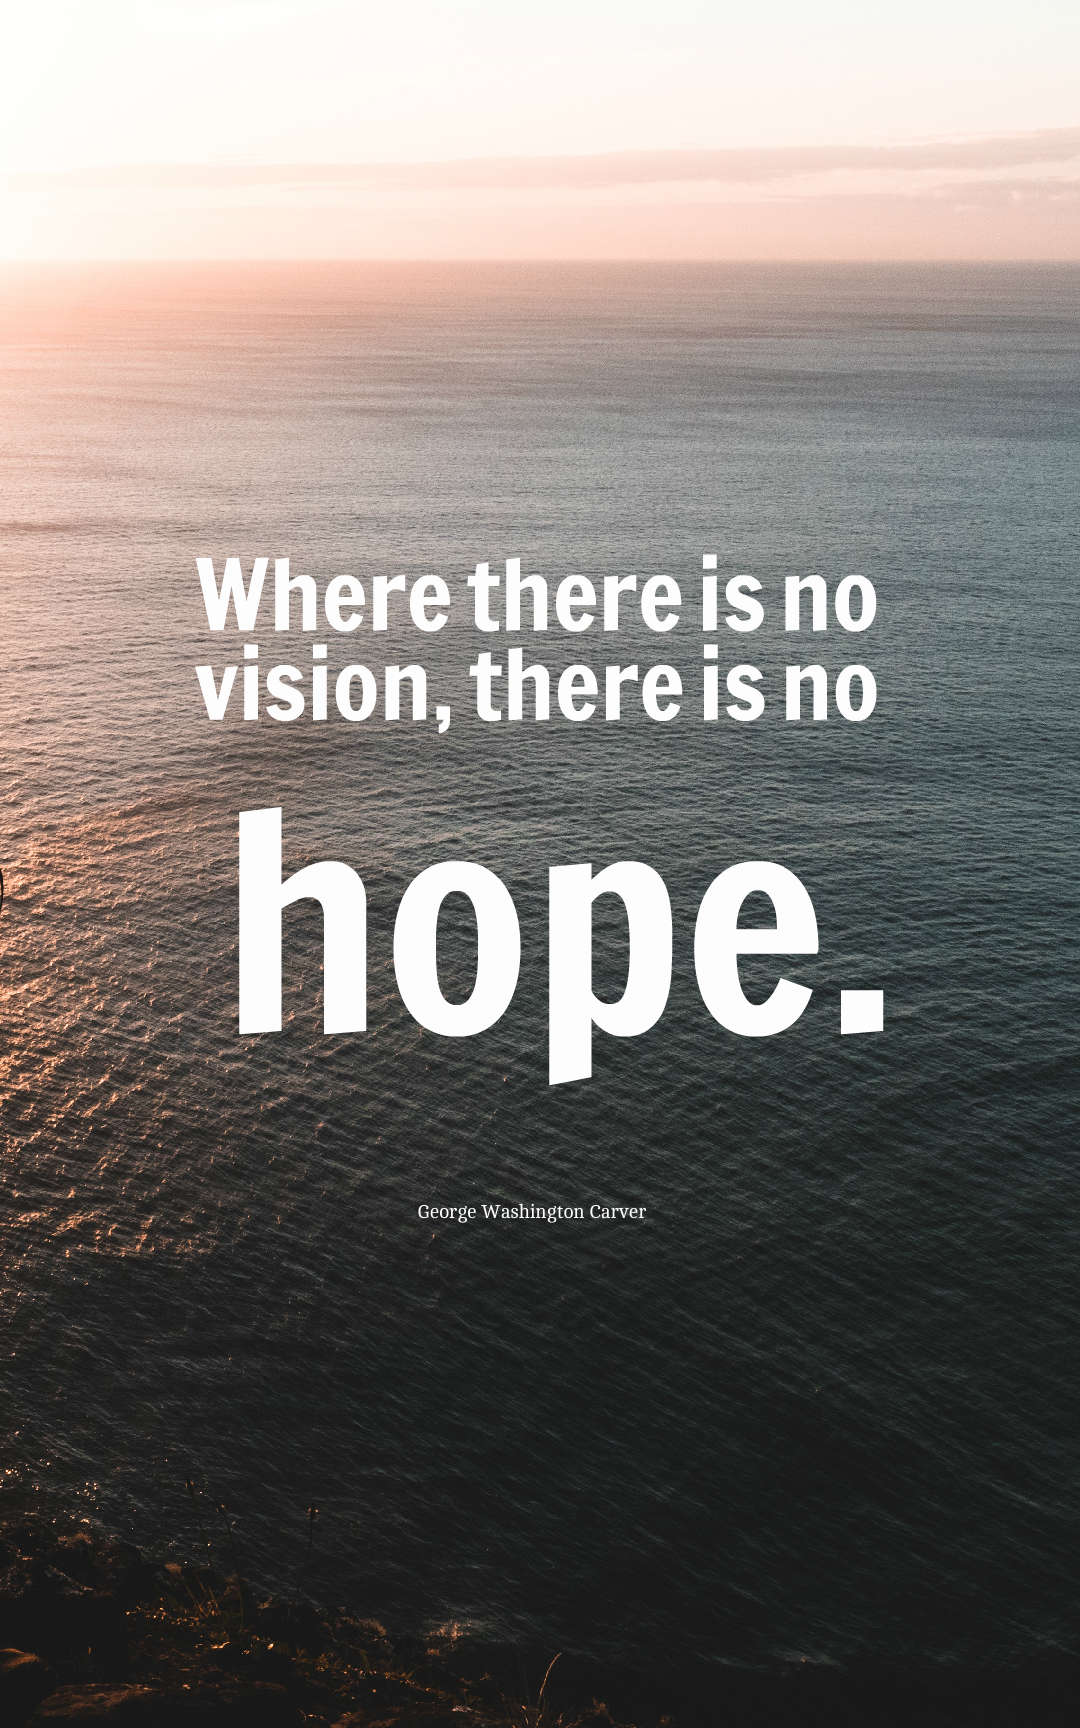 Where there is no vision, there is no hope.